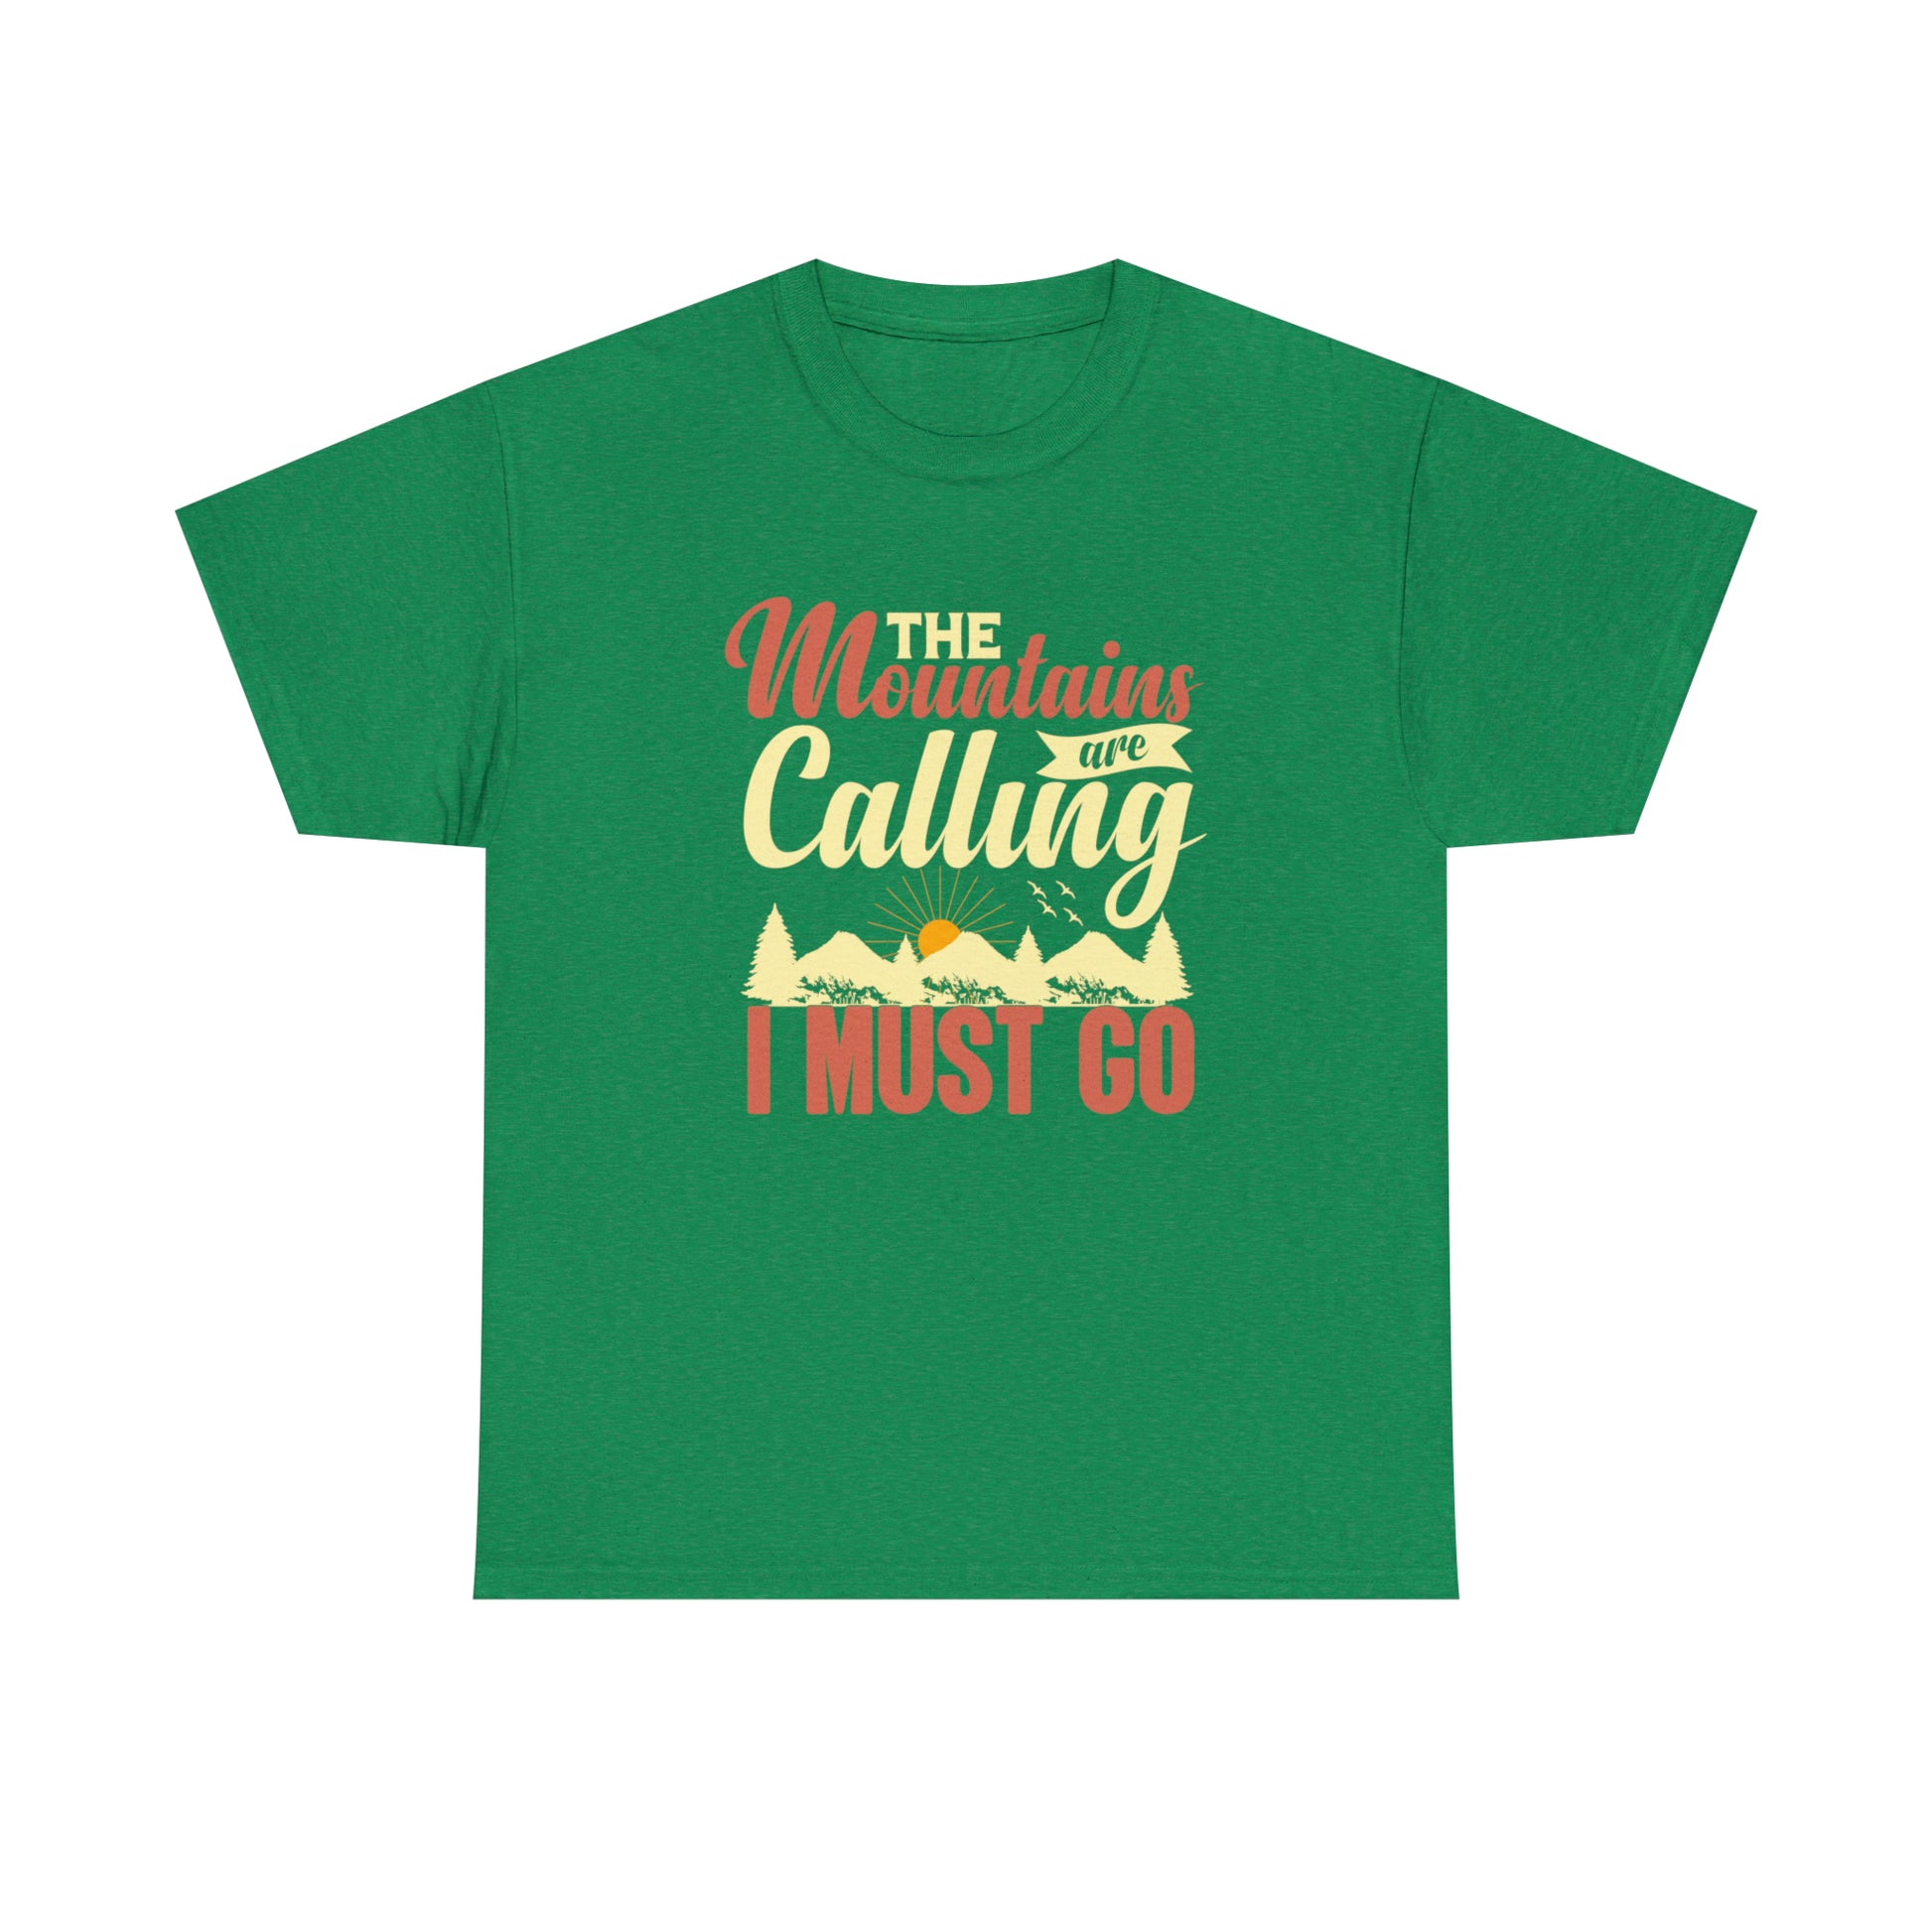 "The Mountains Are Calling" T-Shirt - Weave Got Gifts - Unique Gifts You Won’t Find Anywhere Else!